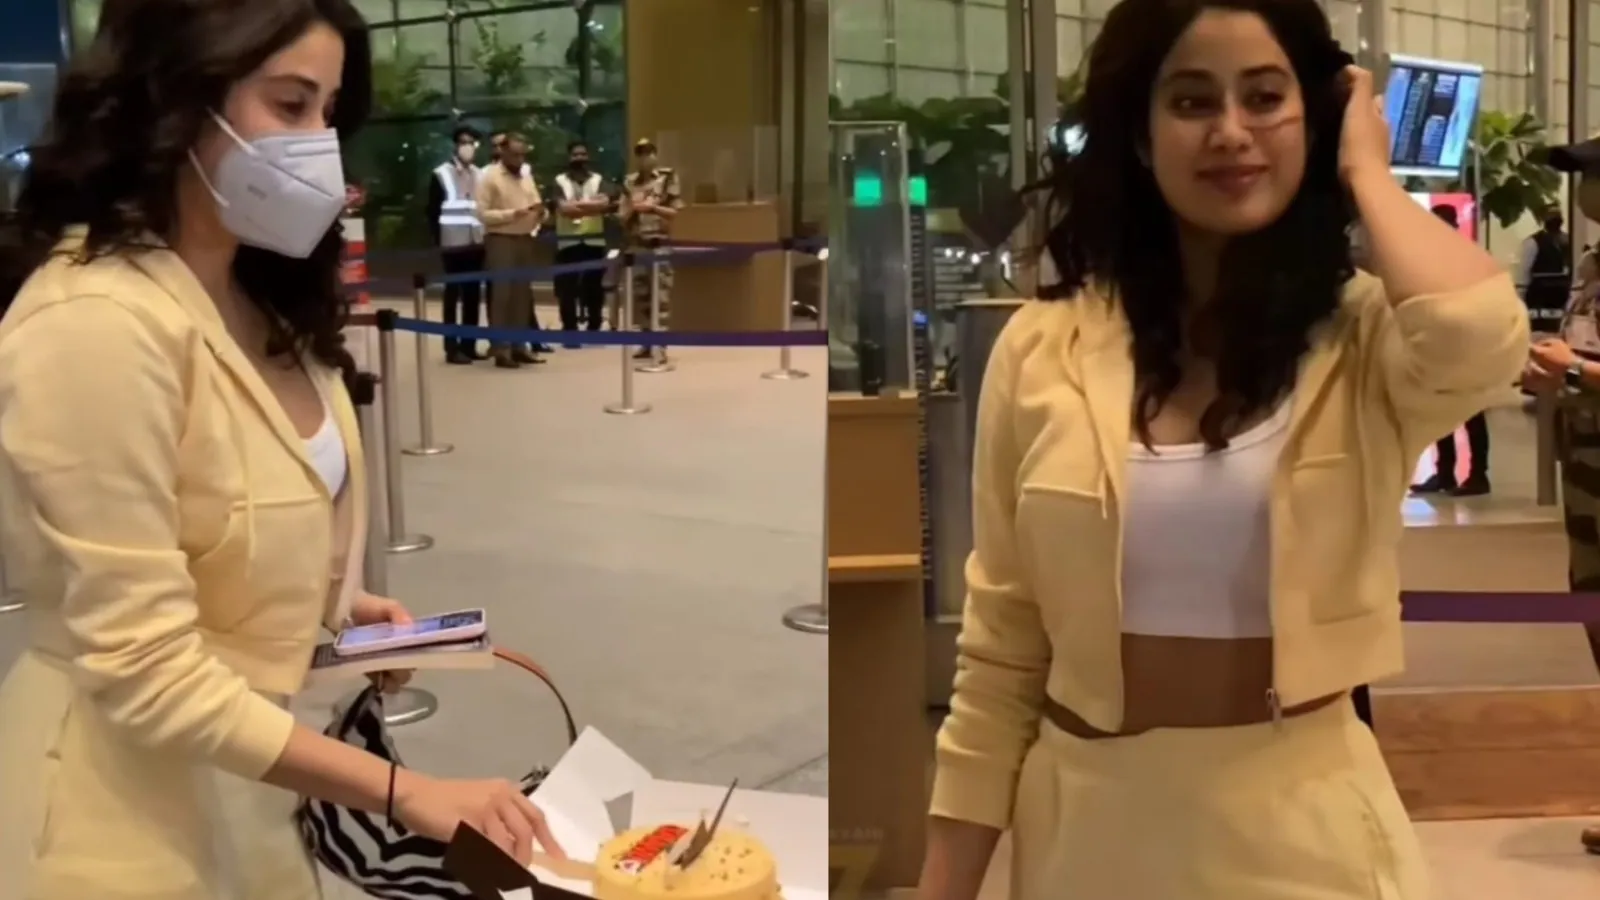 Janhvi Kapoor cuts cake with paparazzi at Mumbai Airport ahead of birthday, fans say ‘she is so humble and sweet’